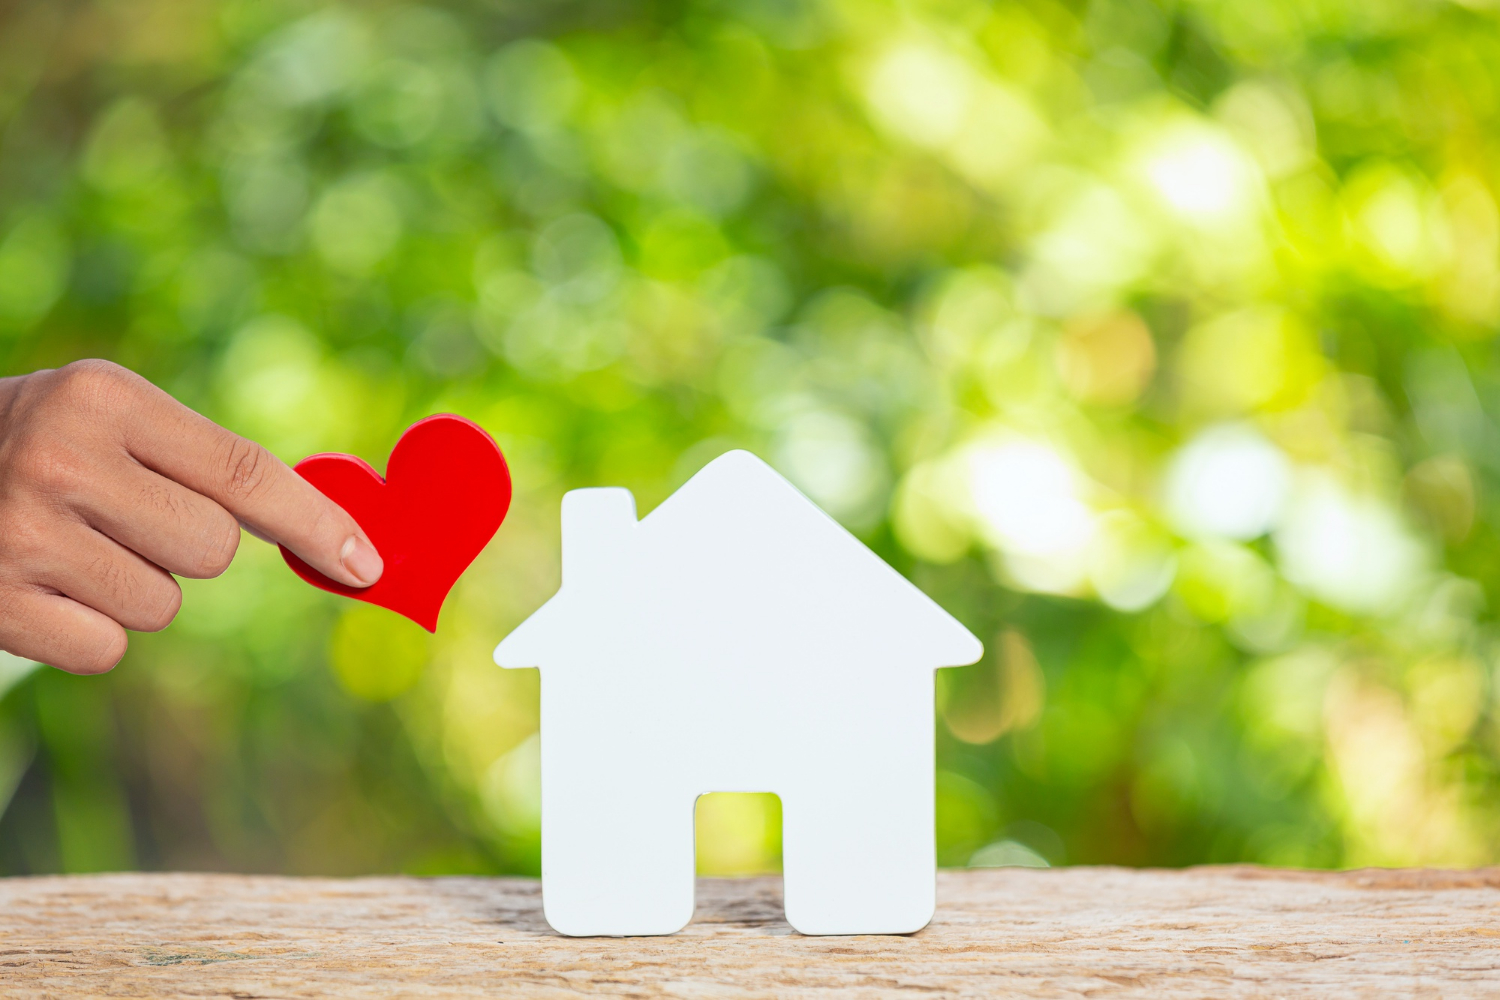 world-habitat-day-close-up-picture-model-house-hand-holding-paper-heart